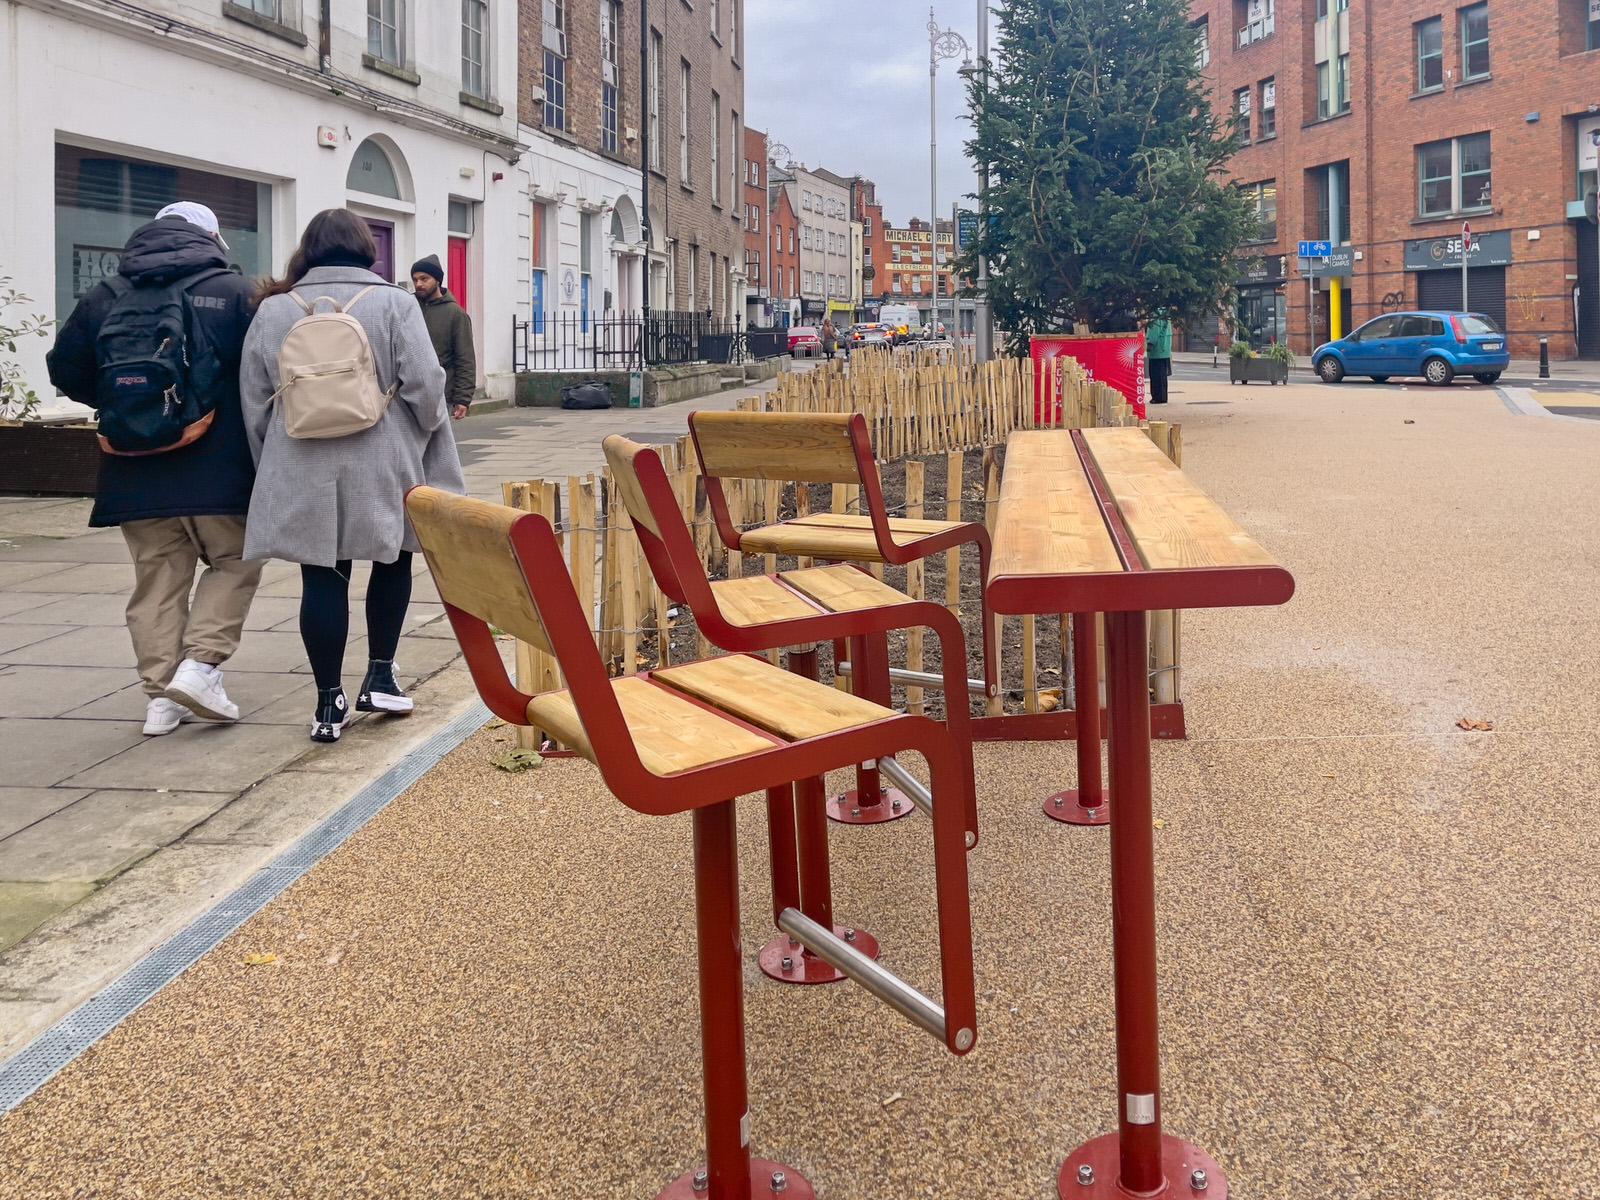 THE NEW STREET FURNITURE IS BEING INSTALLED ON CAPEL STREET [BUT THERE ARE FEW VISITORS TO BE SEEN TODAY] 006